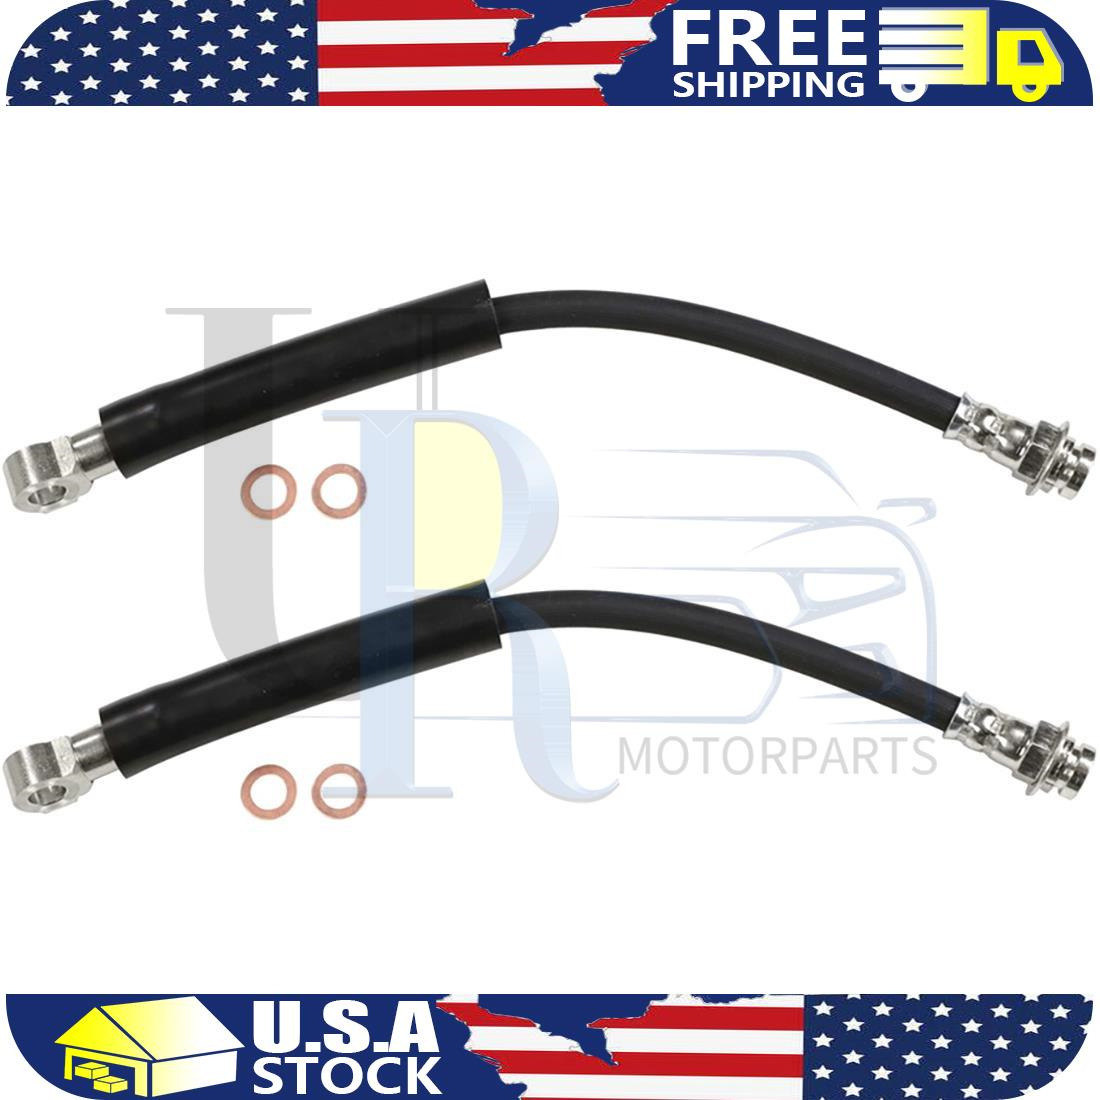 Sunsong 2pcs Front Brake Hydraulic Hose For Oldsmobile Cutlass 1978-1986 1987